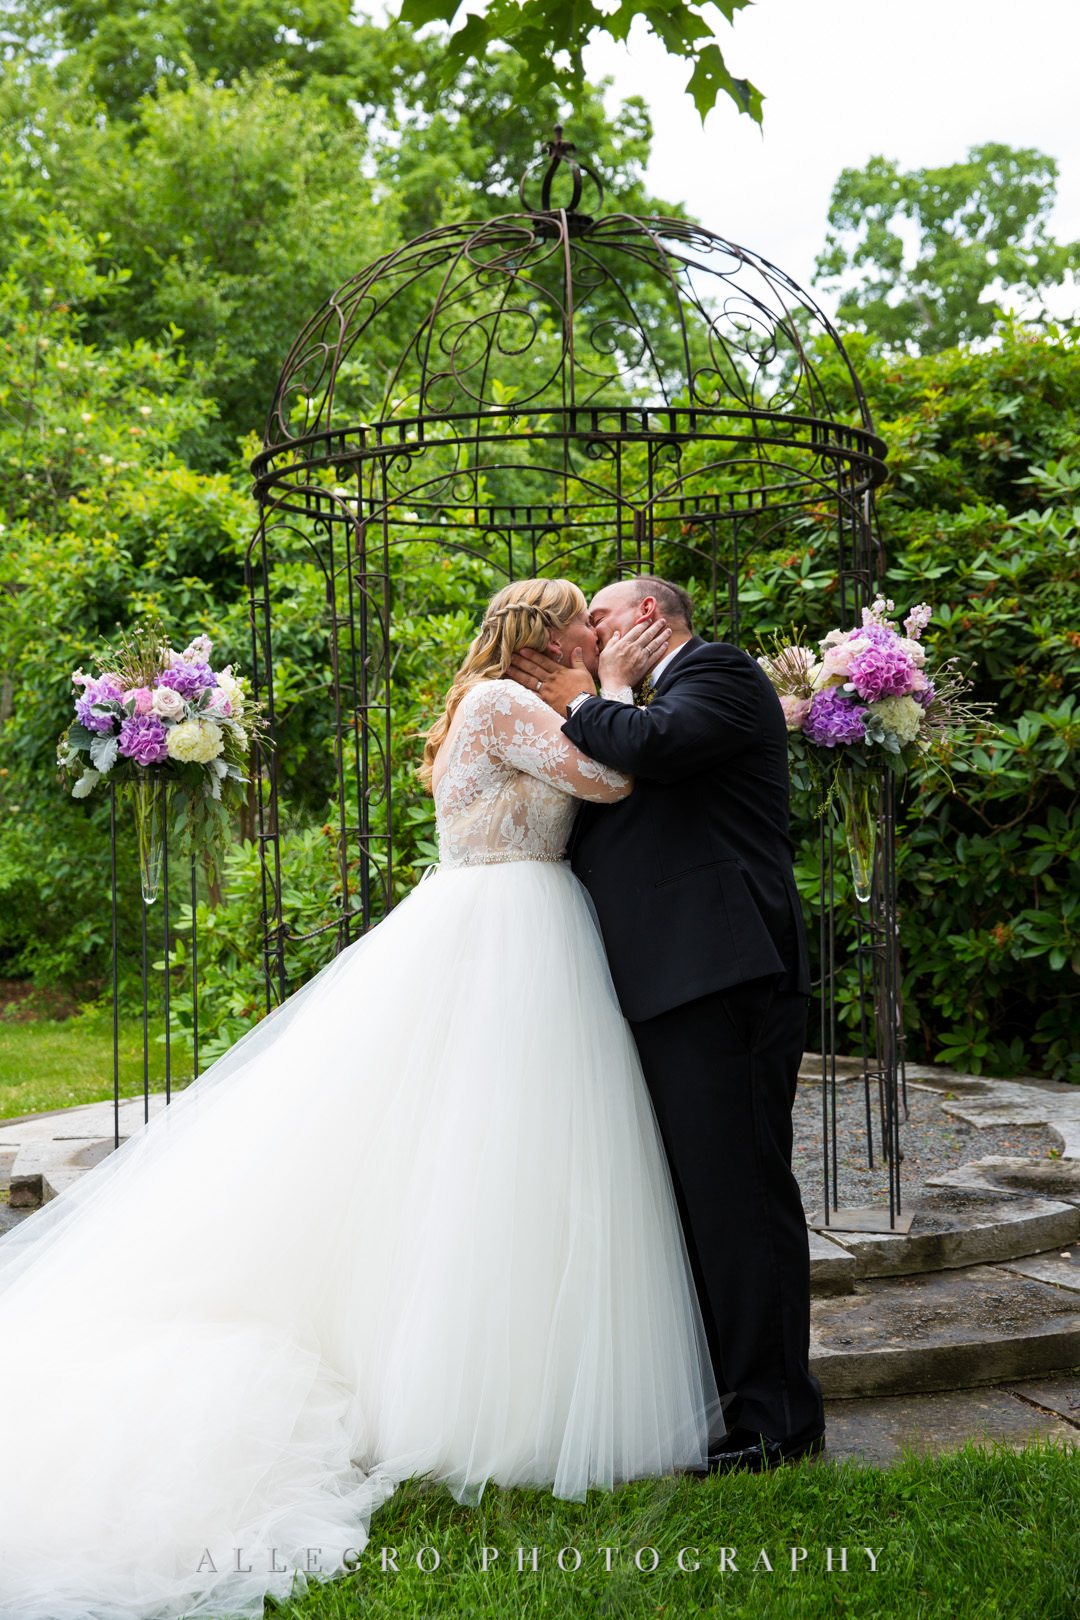 Wedding couple kiss at alter | Allegro Photography